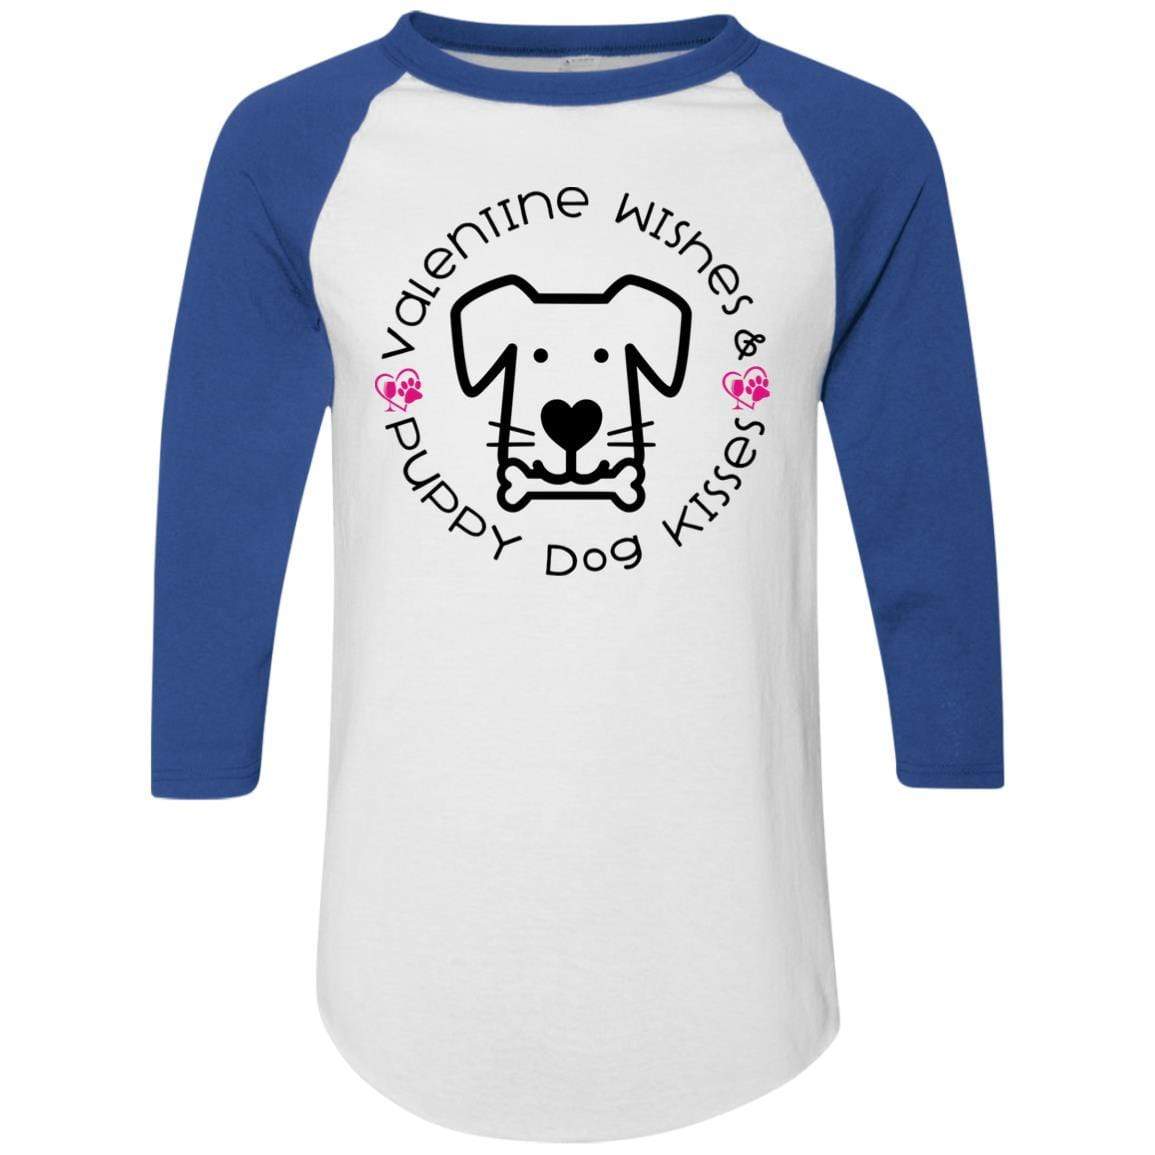 T-Shirts White/Royal / S Winey Bitches Co 'Valentine Wishes and Puppy Dog Kisses" (Dog) Colorblock Raglan Jersey WineyBitchesCo